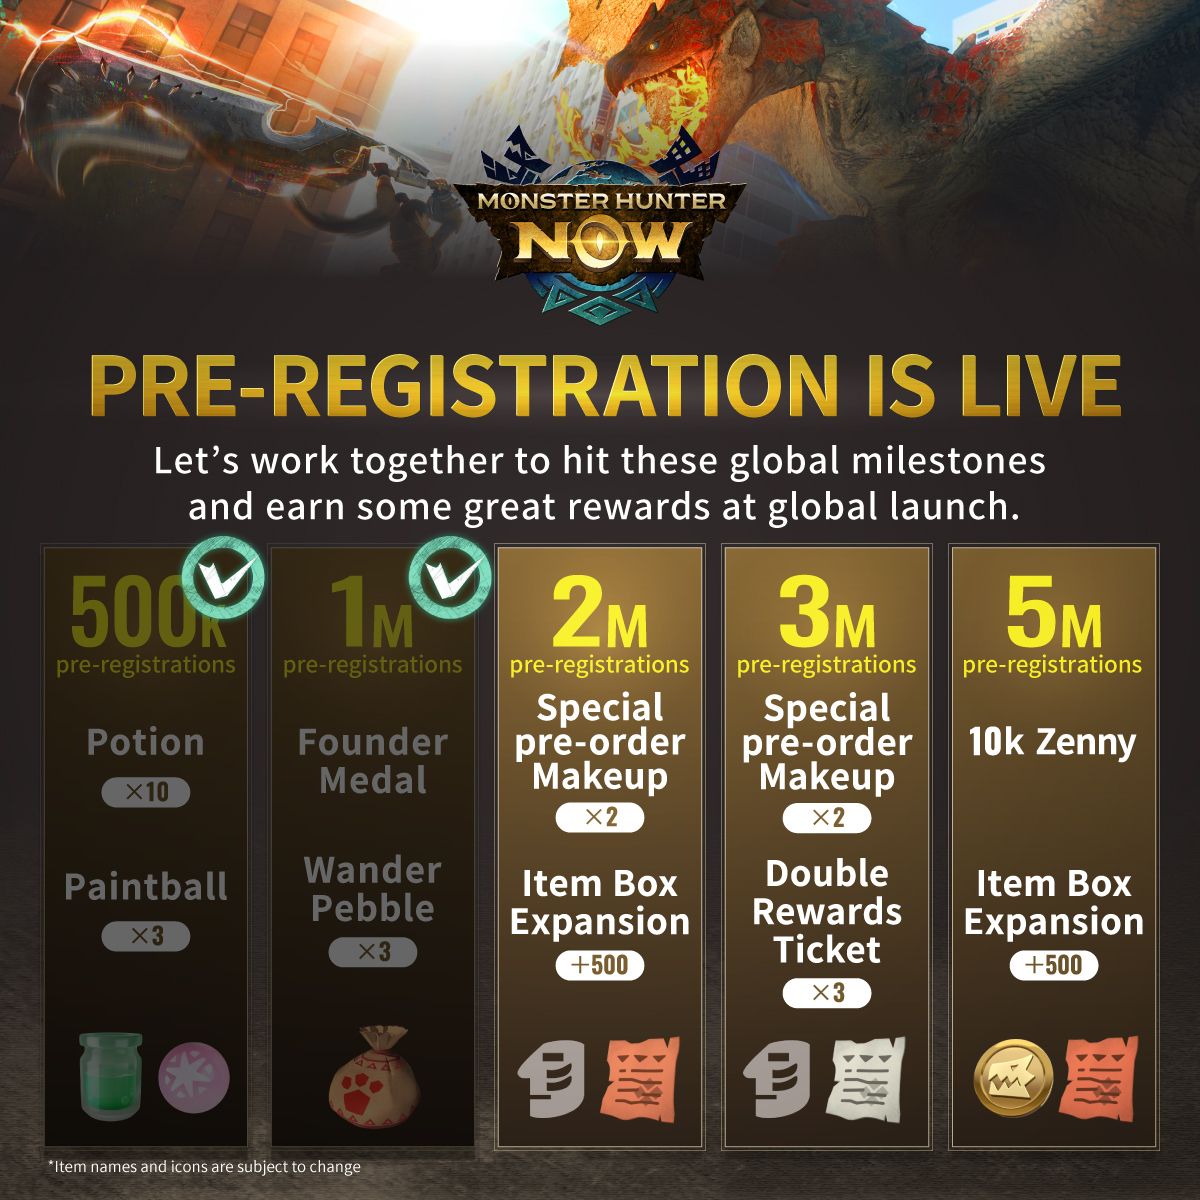 Monster Hunter Now Pre-Registration Milestones with five columns for 500k, 1m, 2m, 3m and 5m signups